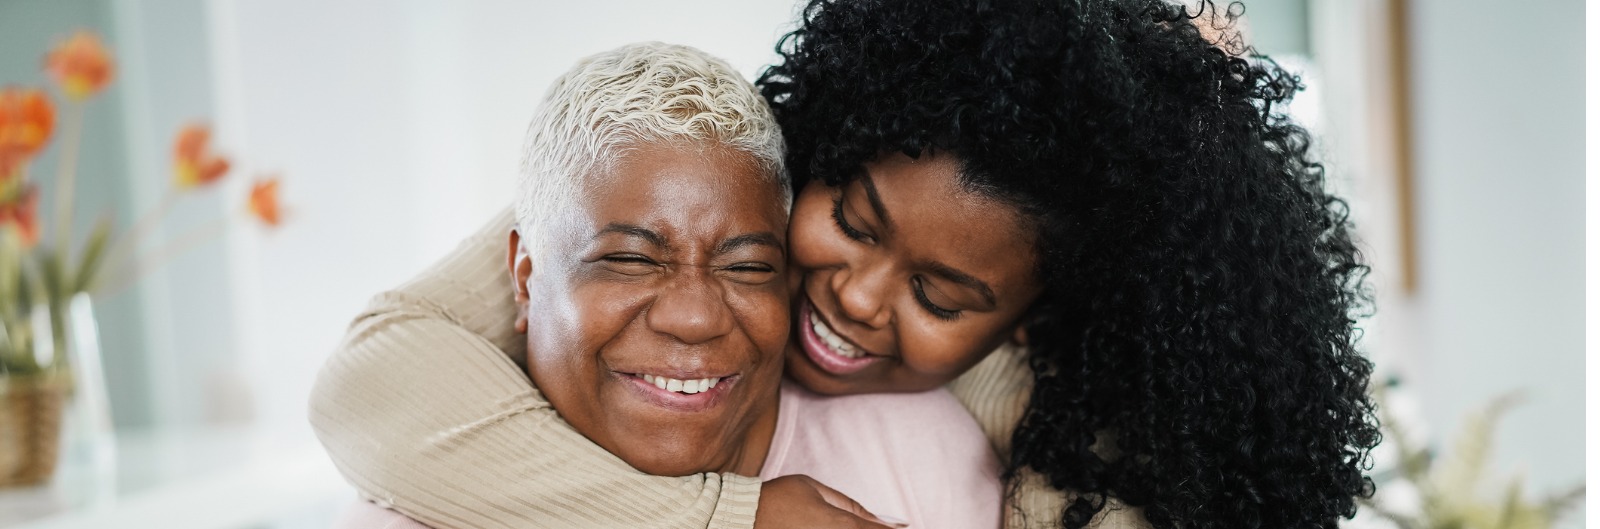 african-daughter-hugging-her-mum-indoors-at-home-main-focus-on-senior-picture-1600x529.jpg